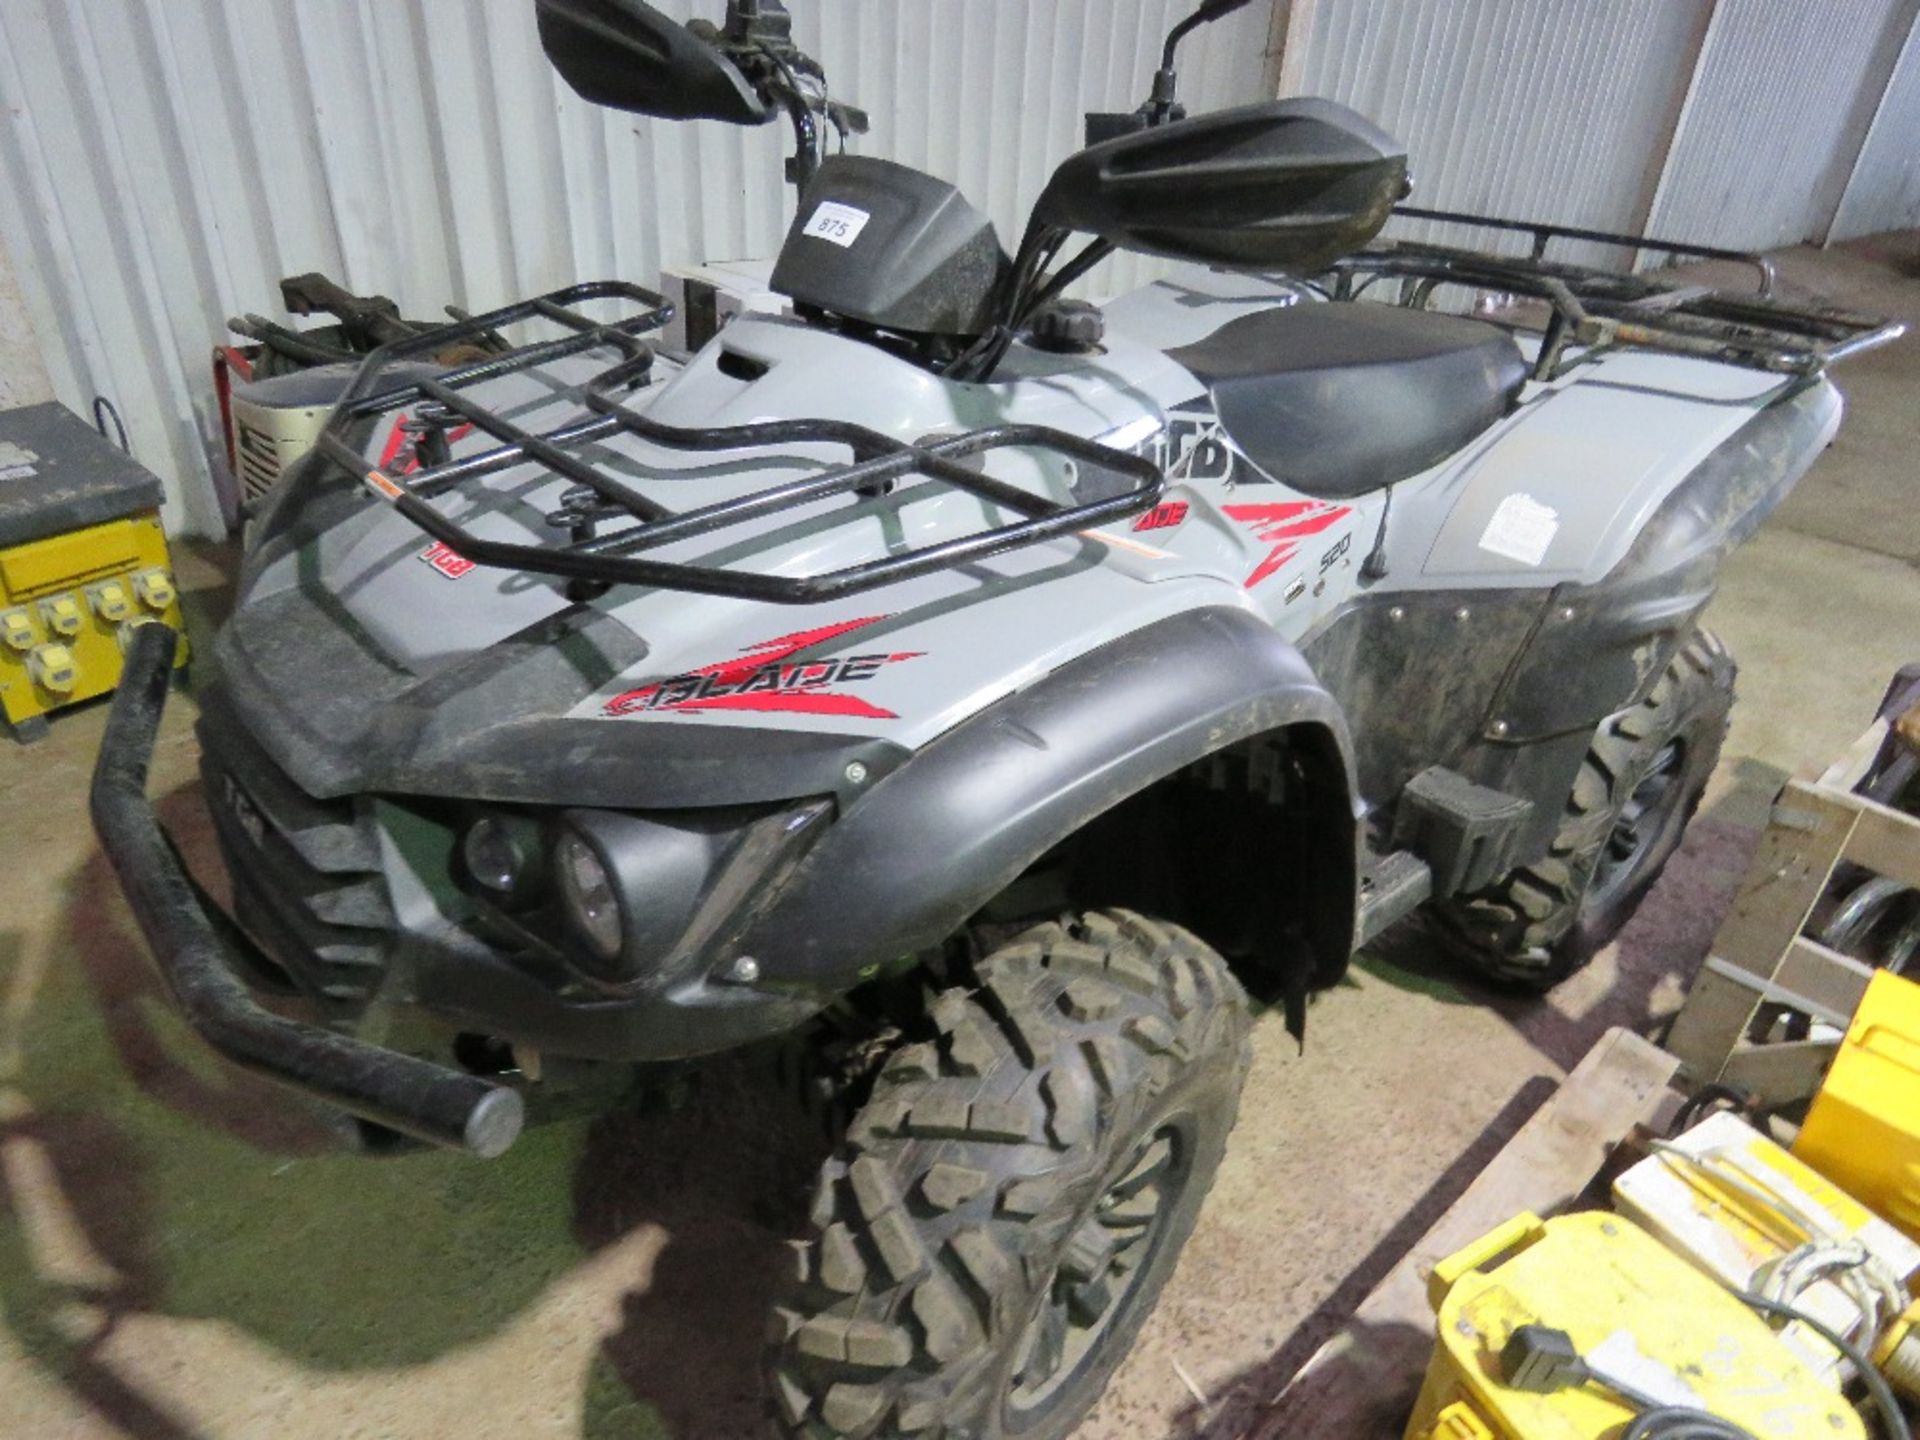 TGB BLADE 520SL EPS 4WD QUAD BIKE, 164 REC MILES FROM NEW. REG:LG72 MYO. WHEN TESTED WAS SEEN TO STA